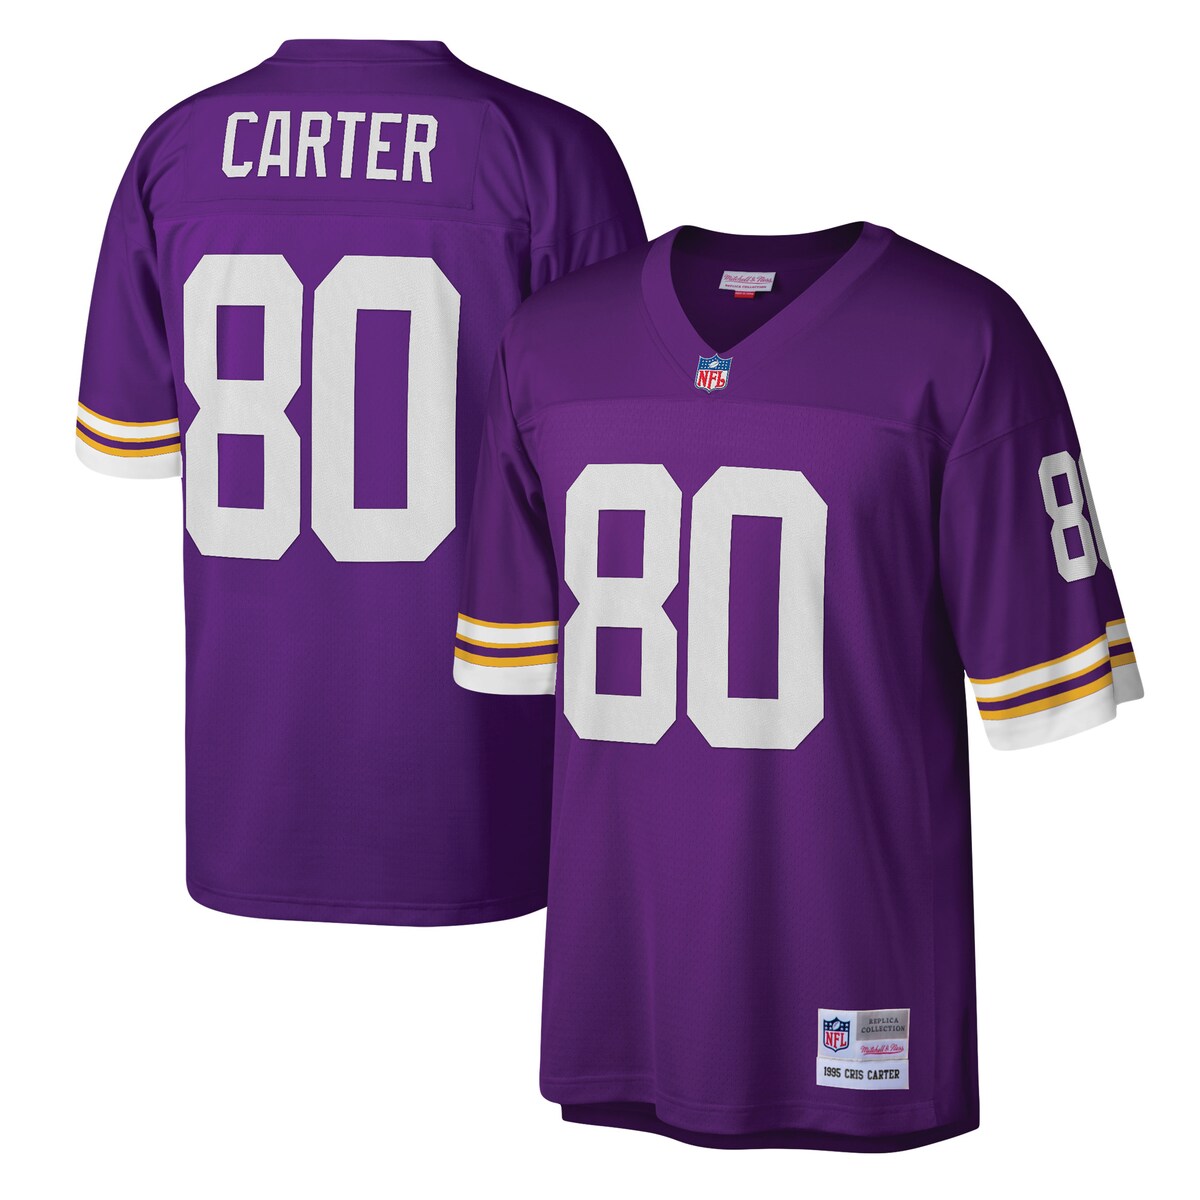 You're a massive Minnesota Vikings fan and also loved watching Cris Carter play. Now you can show off your fandom for both when you get this Cris Carter Minnesota Vikings Legacy replica jersey from Mitchell & Ness. It features distinctive throwback Minnesota Vikings graphics on the chest and back, perfect for wearing at a home game. By wearing this jersey, you'll be able to feel like you're reliving some of the great plays that Cris Carter accomplished to lead the Minnesota Vikings to glory.ReplicaOfficially licensedEmbroidered twill graphicsMaterial: 100% PolyesterV-neckFabric applique sewn onSublimated rib-knit sleeve insertsMachine wash, line dryMesh fabricWoven tags at bottom hemImportedBrand: Mitchell & NessSide splits at waist hemShort sleevesEmbroidered NFL Shield at collar